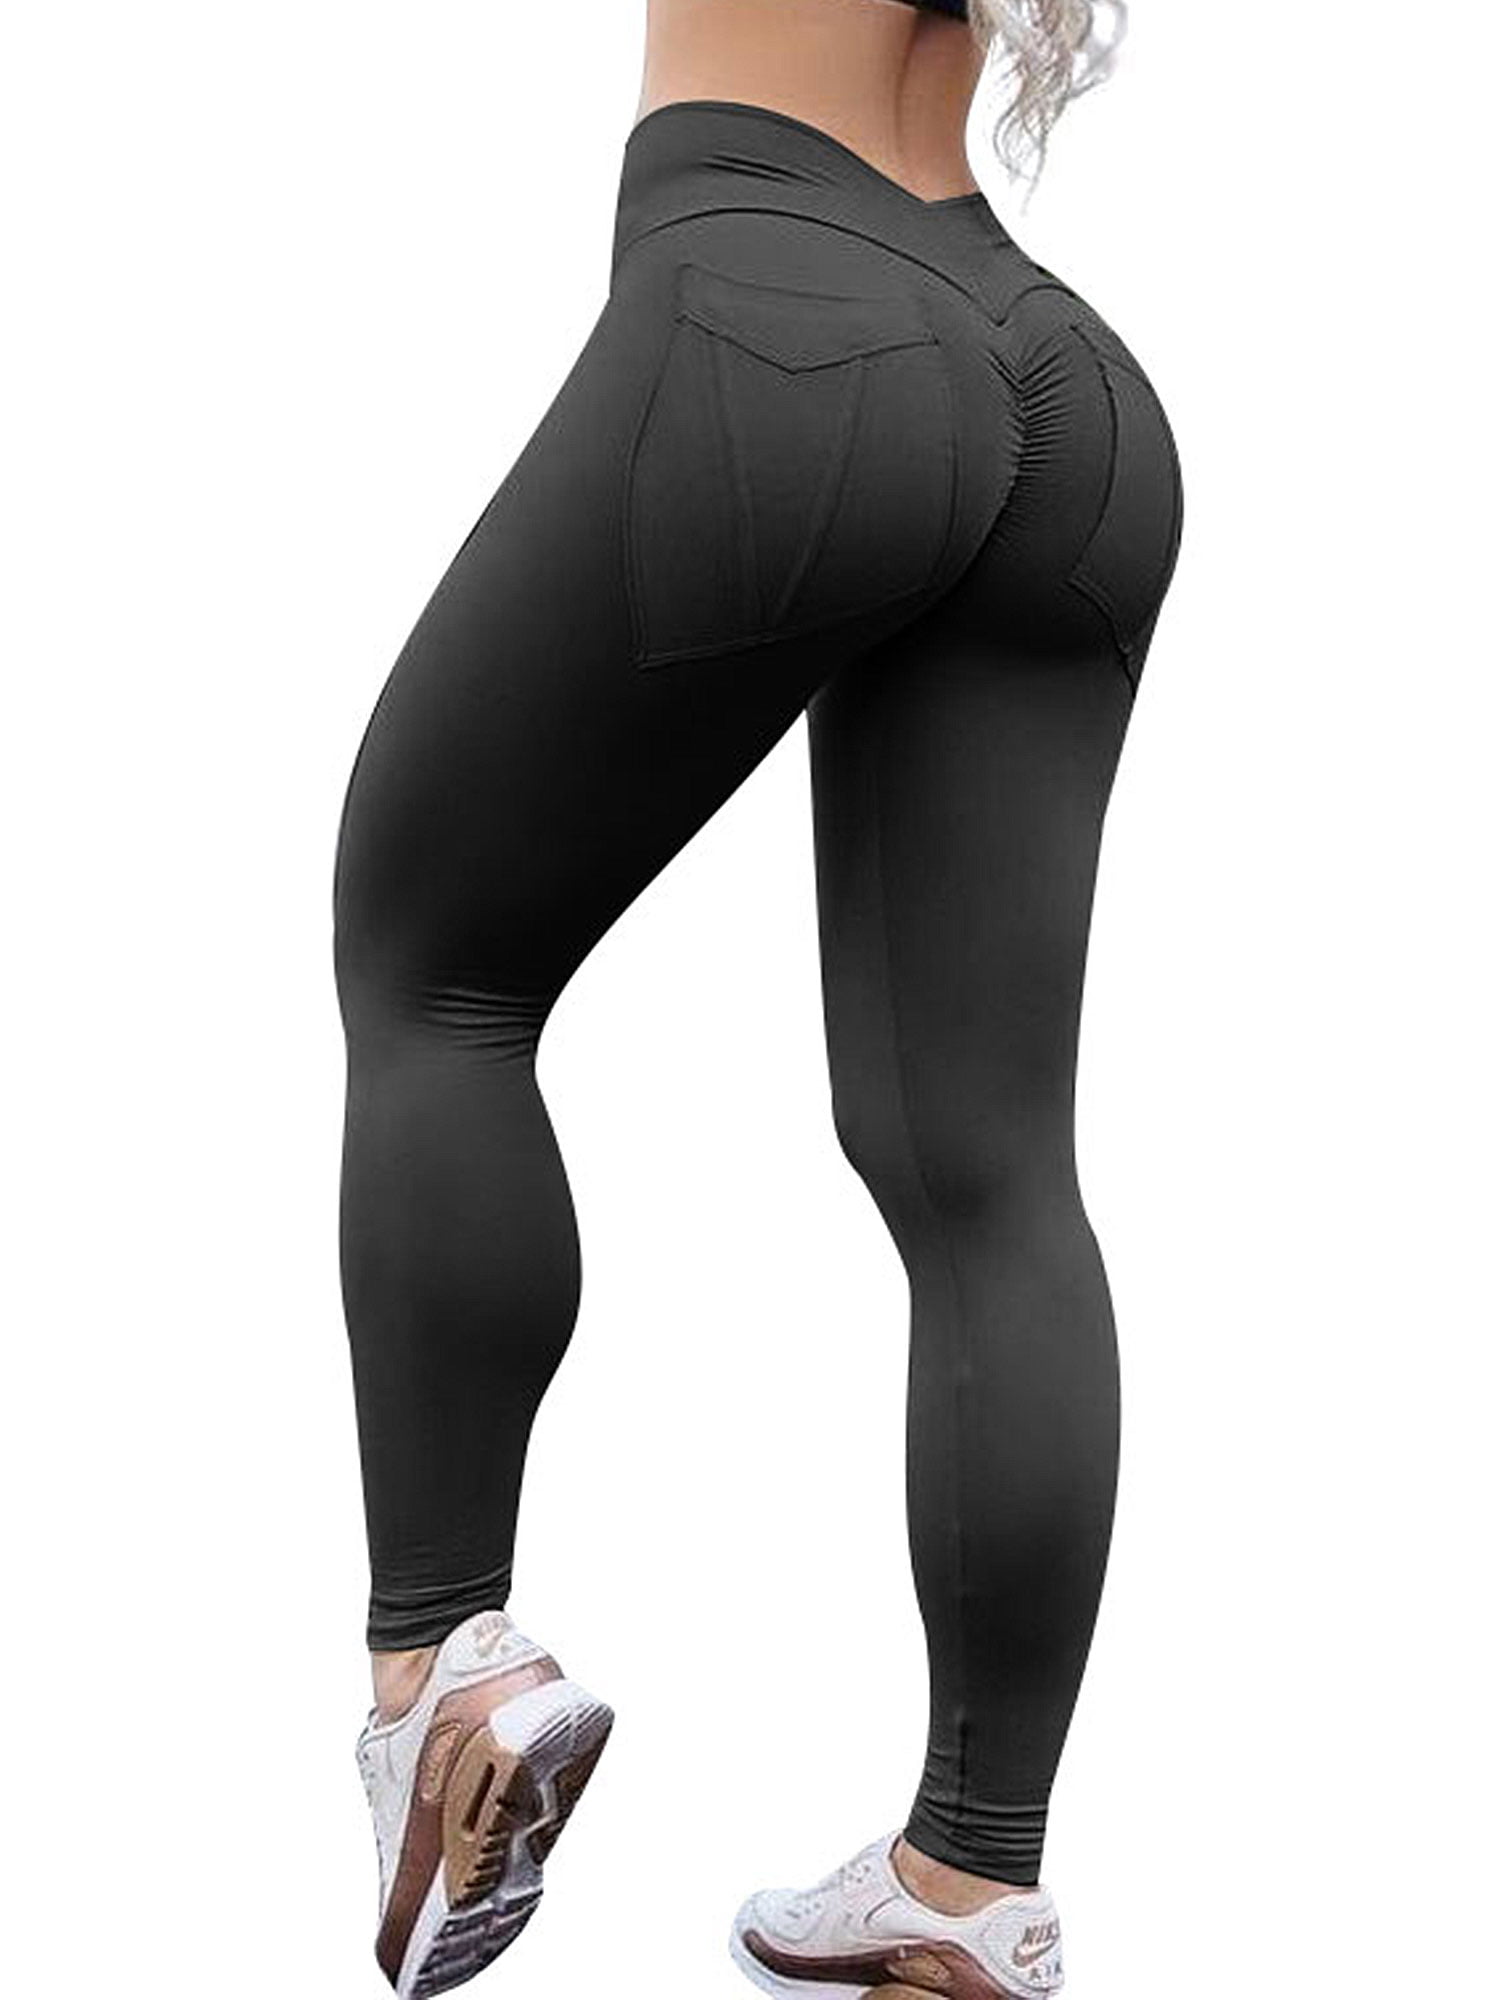 Details about   High Waist Women Yoga Pants Leggings Pockets Compression Workout Ruched Trousers 